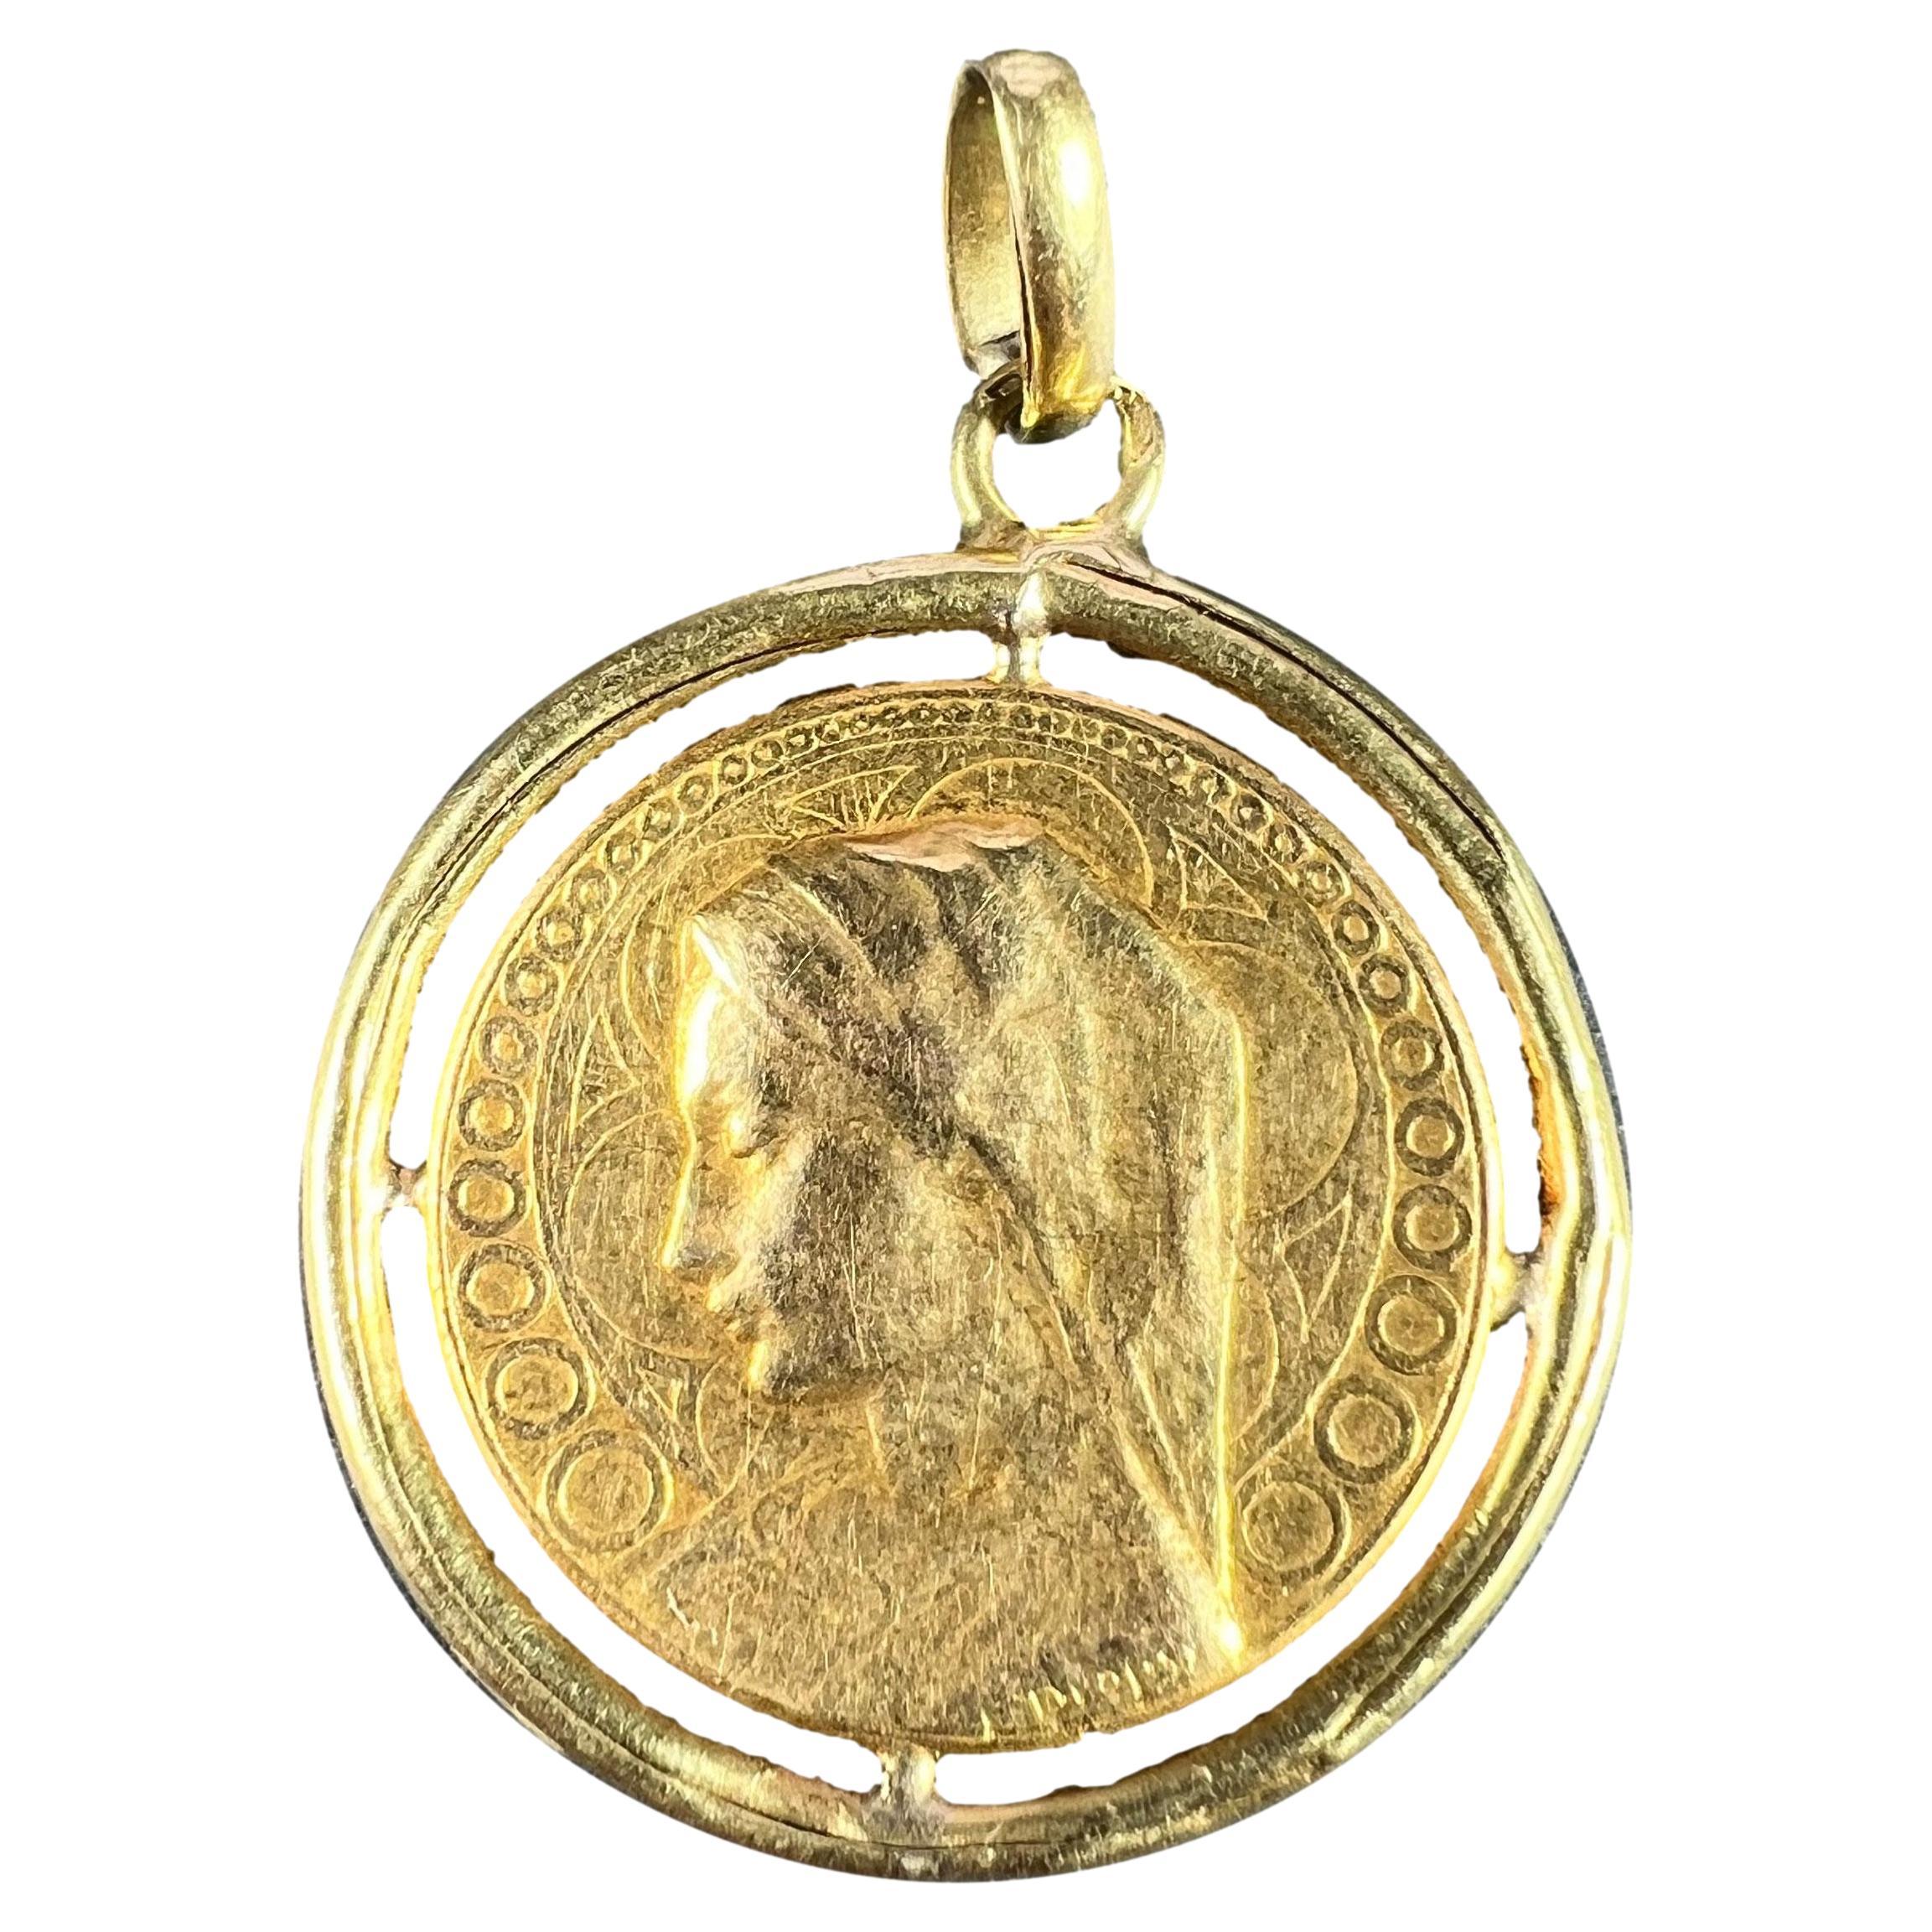 French Dropsy Virgin Mary Virgo Gloriosa 18K Yellow Gold Medal Pendant For Sale